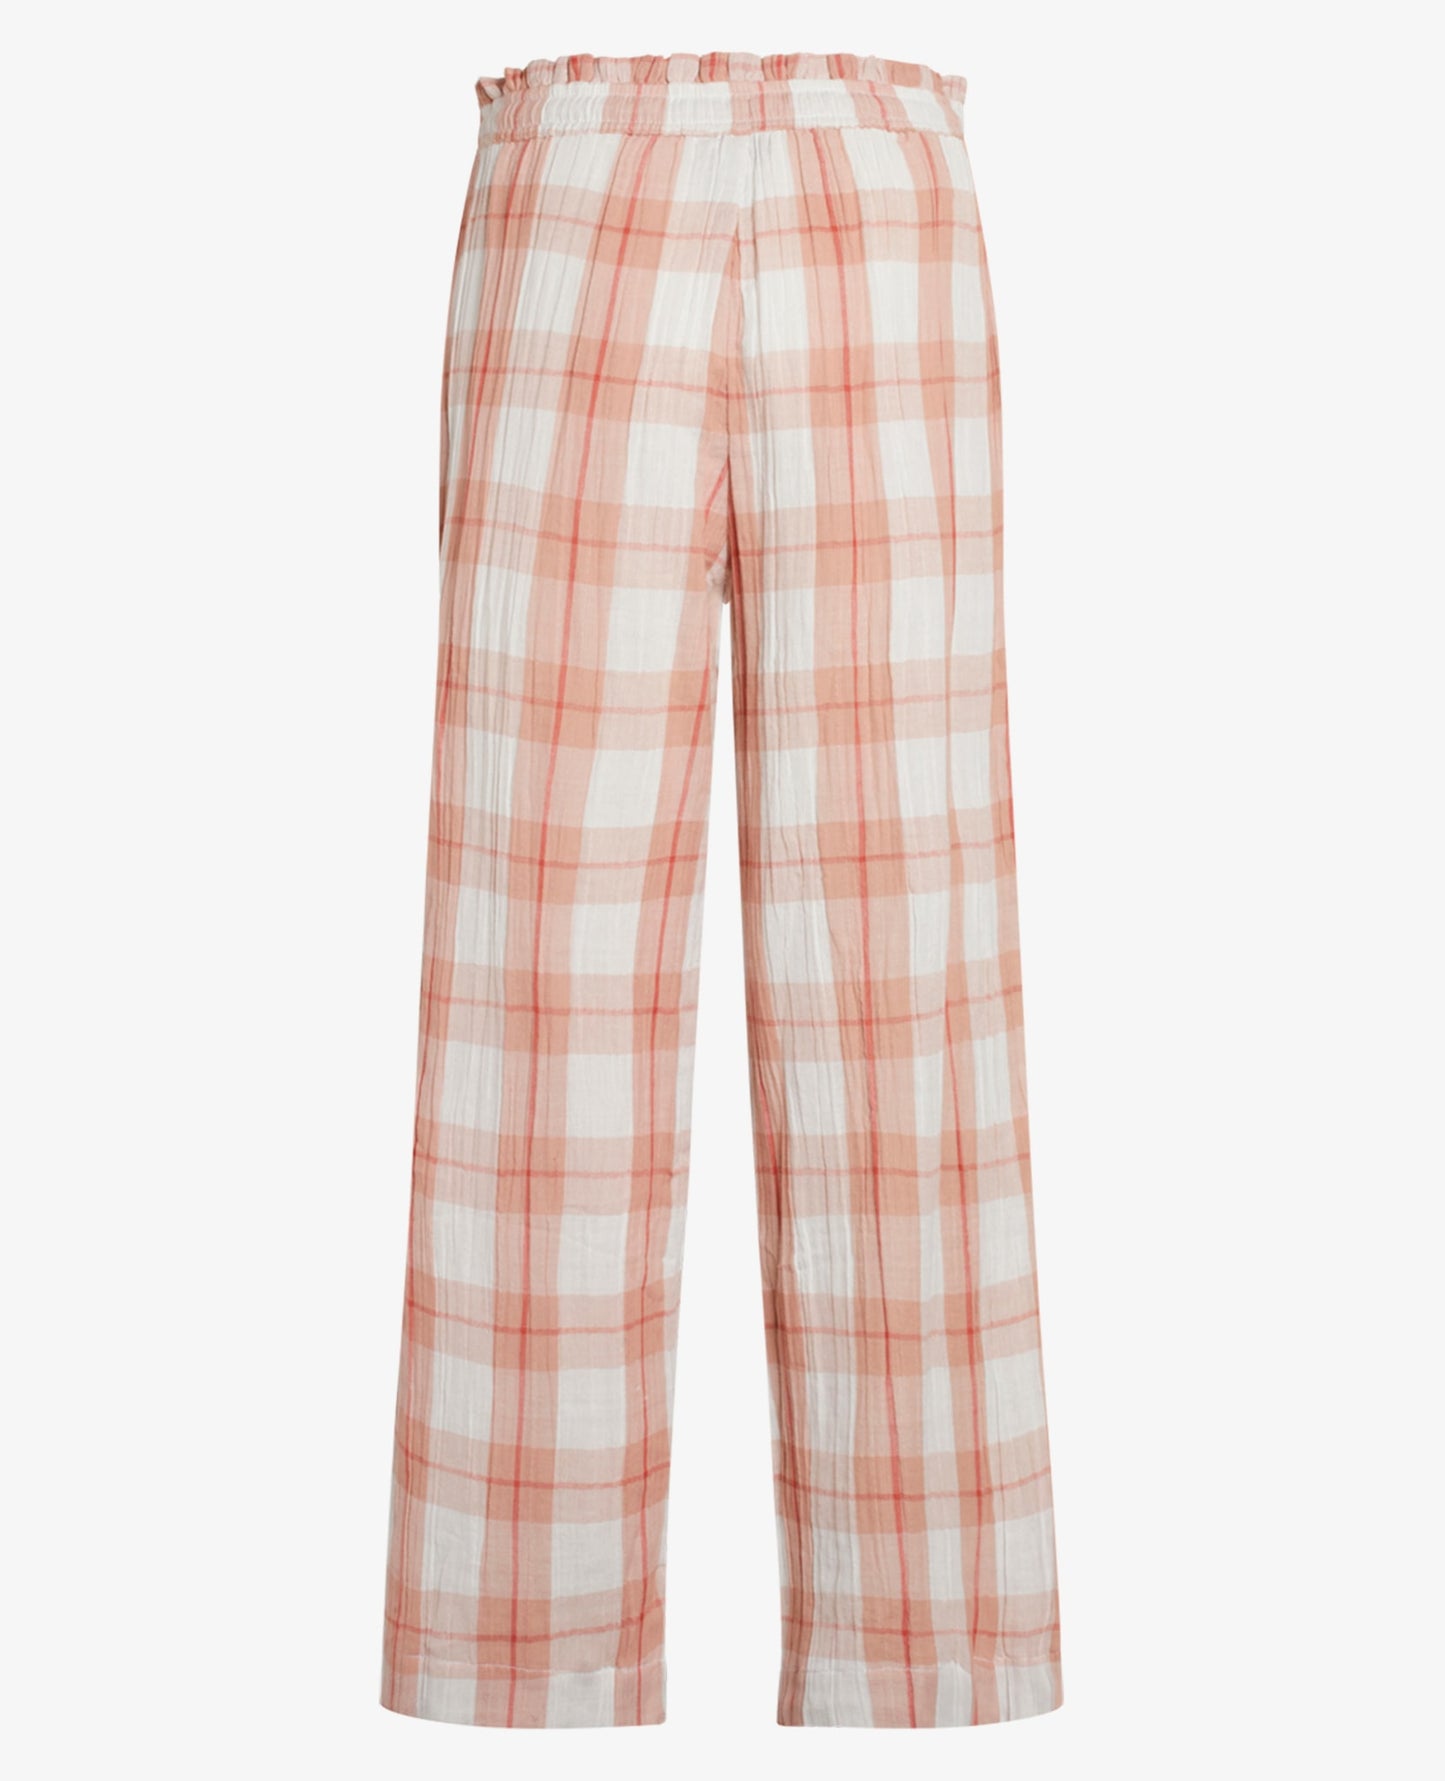 BONDED COTTON TROUSERS